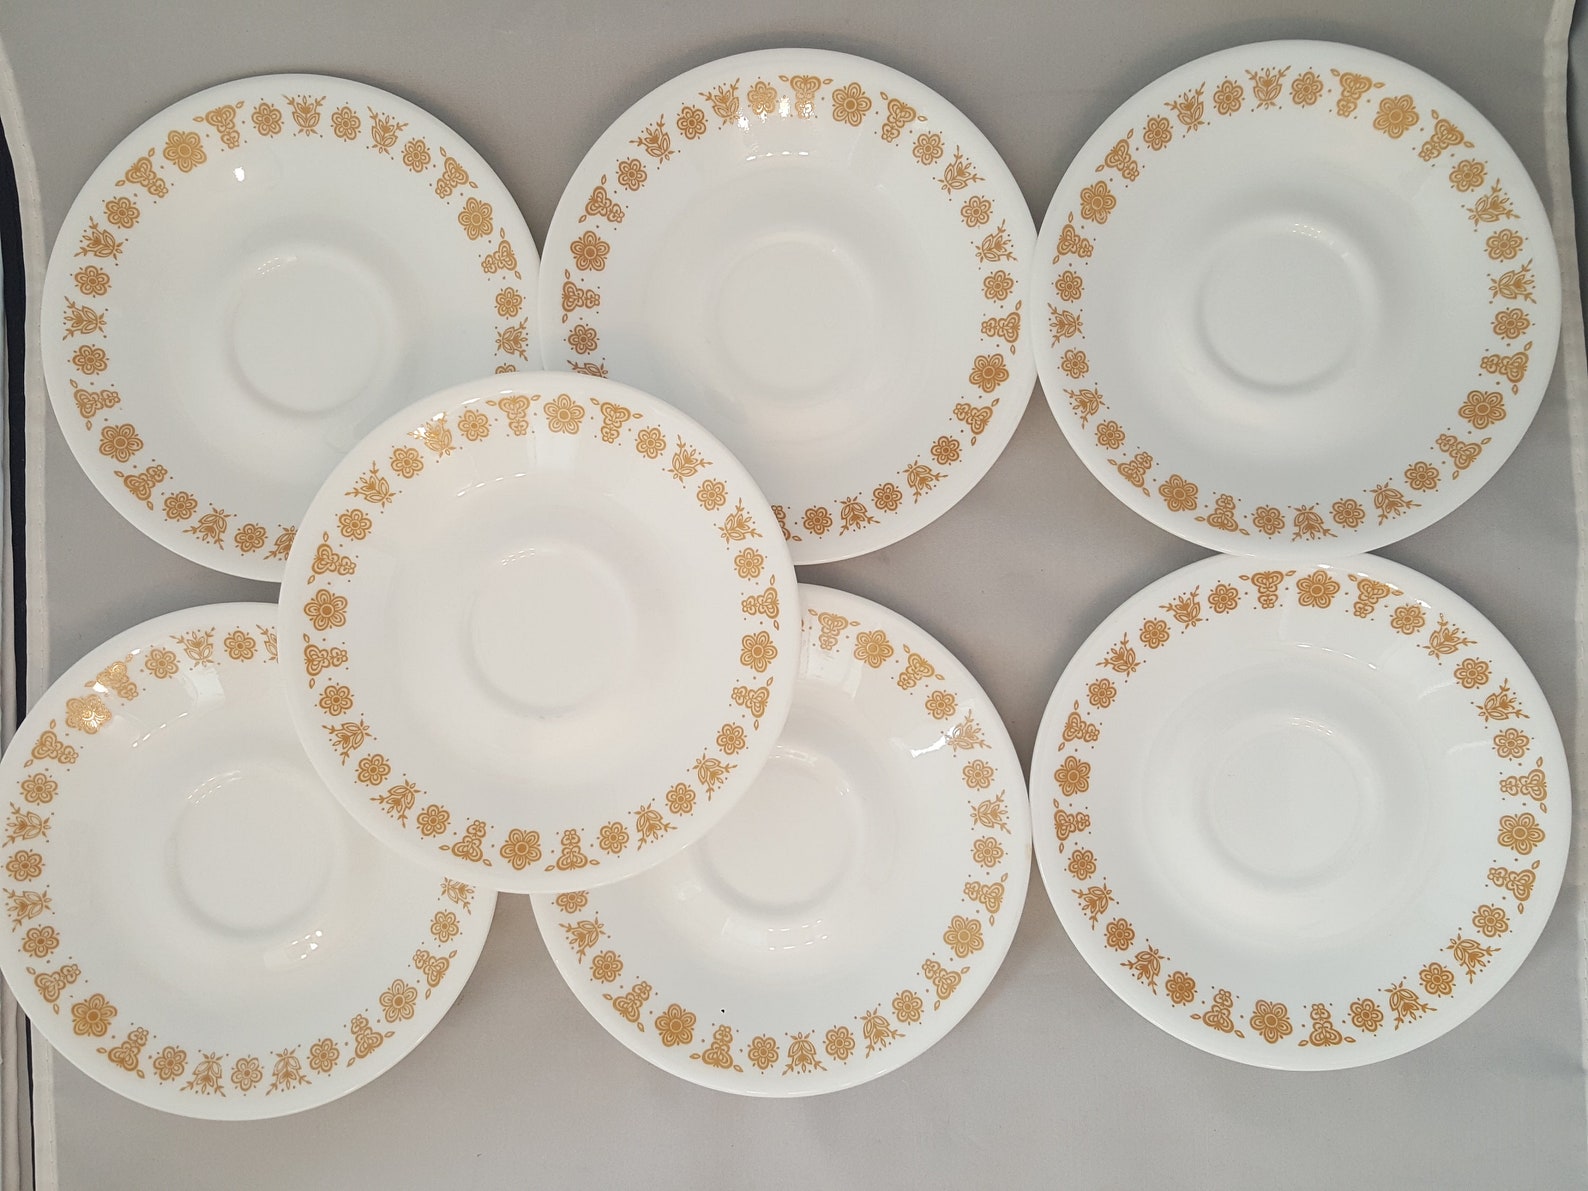 Corelle Butterfly Gold Saucers Livingware by Corning Made in | Etsy